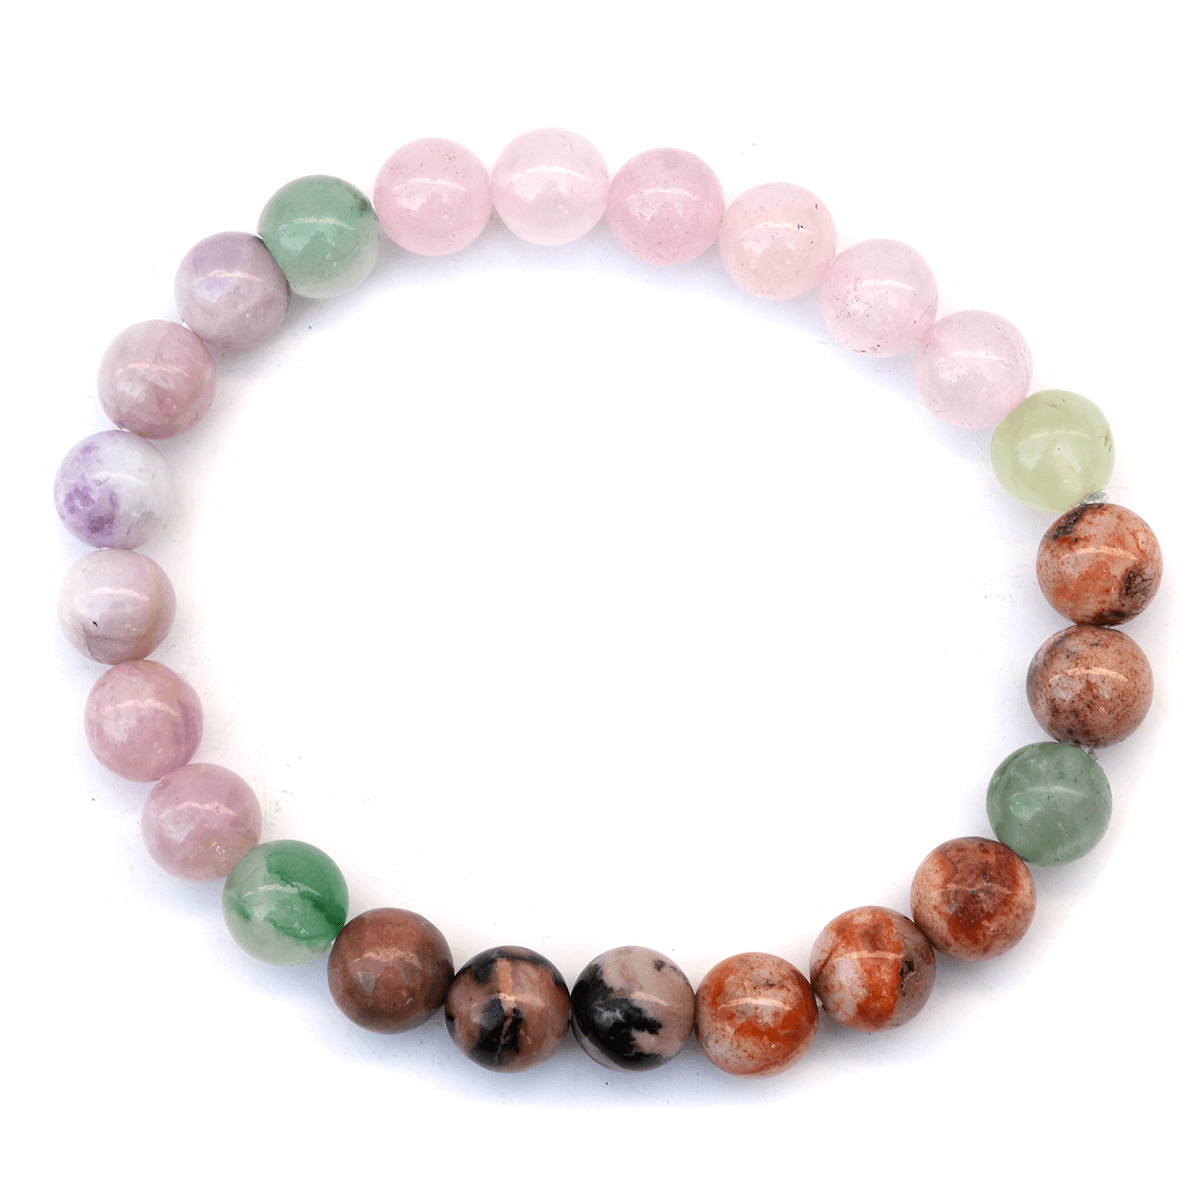 Pre Energized Natural Heart Chakra Crystal Stone bracelet Made with 8 mm Beads for abundance of empathy, compassion, and love.